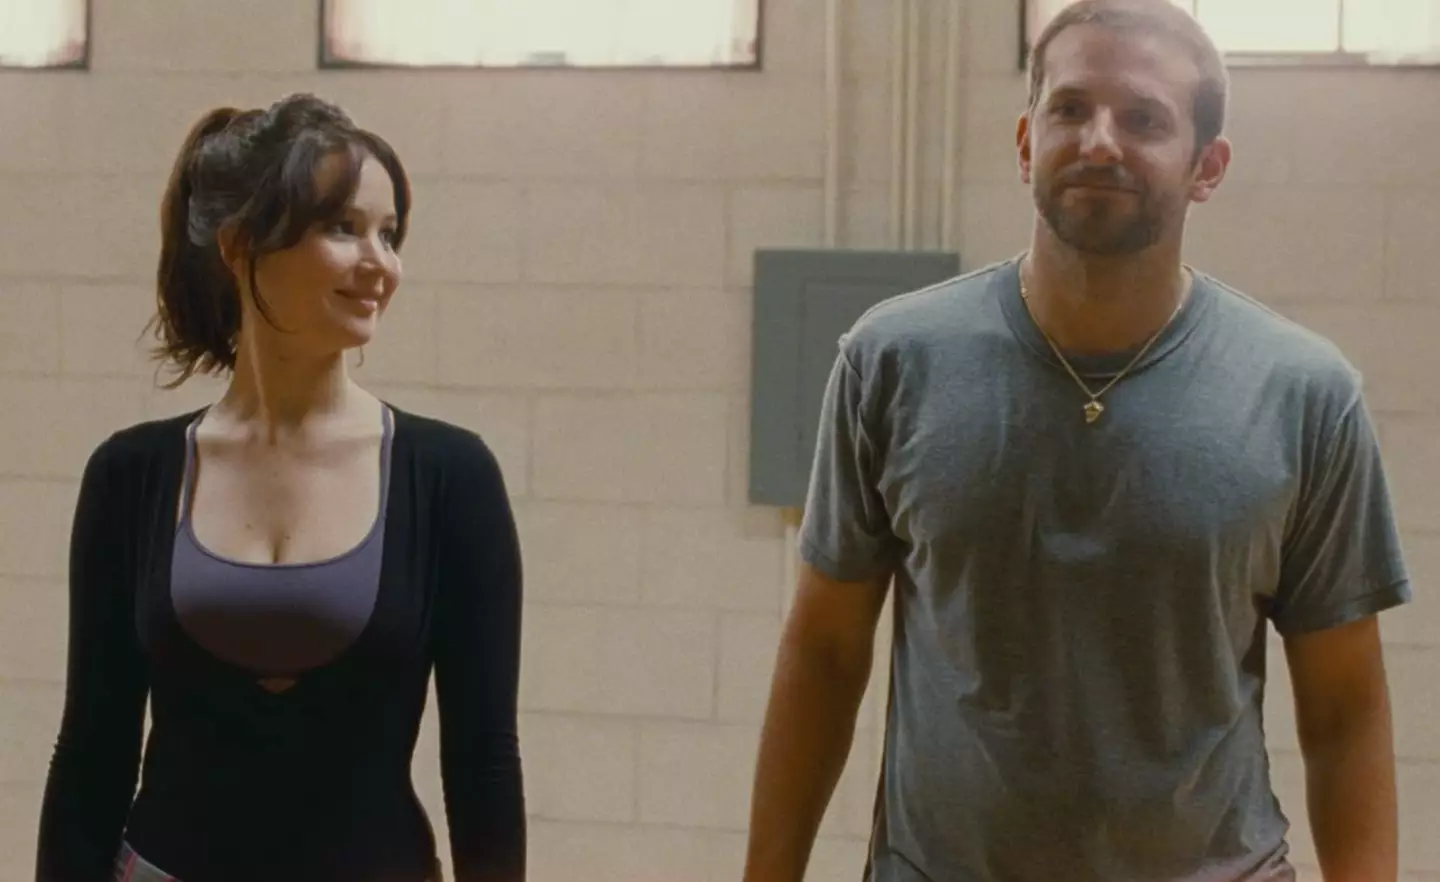 Lawrence and Cooper in Silver Linings Playbook.